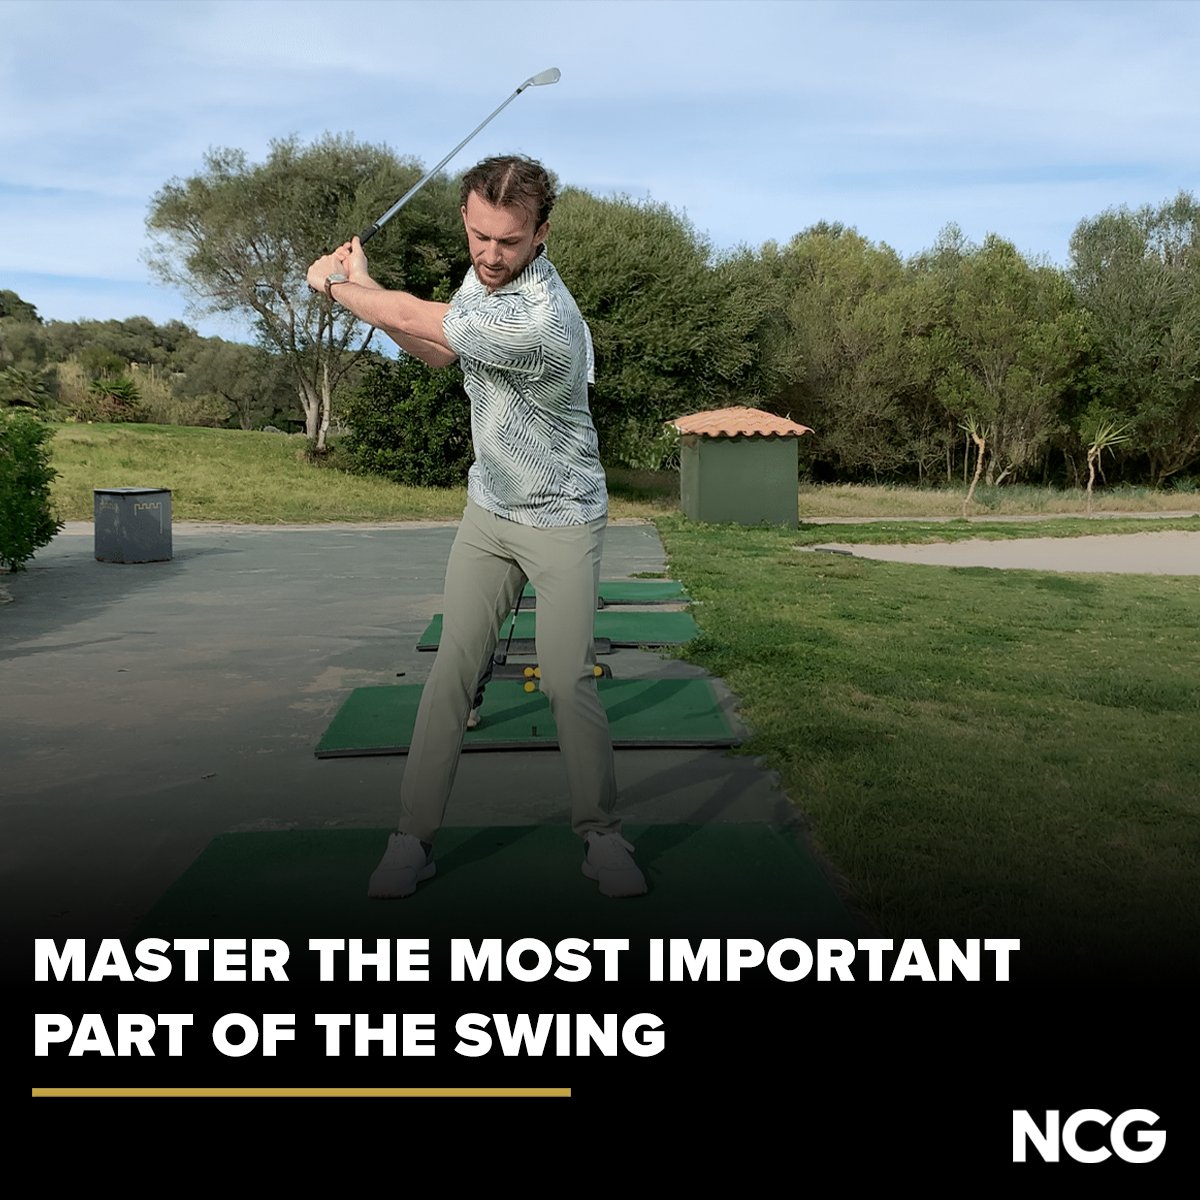 Moving your club and body correctly in transition from backswing to downswing gets you 90% of the way there to hitting perfect golf shots. 🔗 ow.ly/Irsv50RBHzj